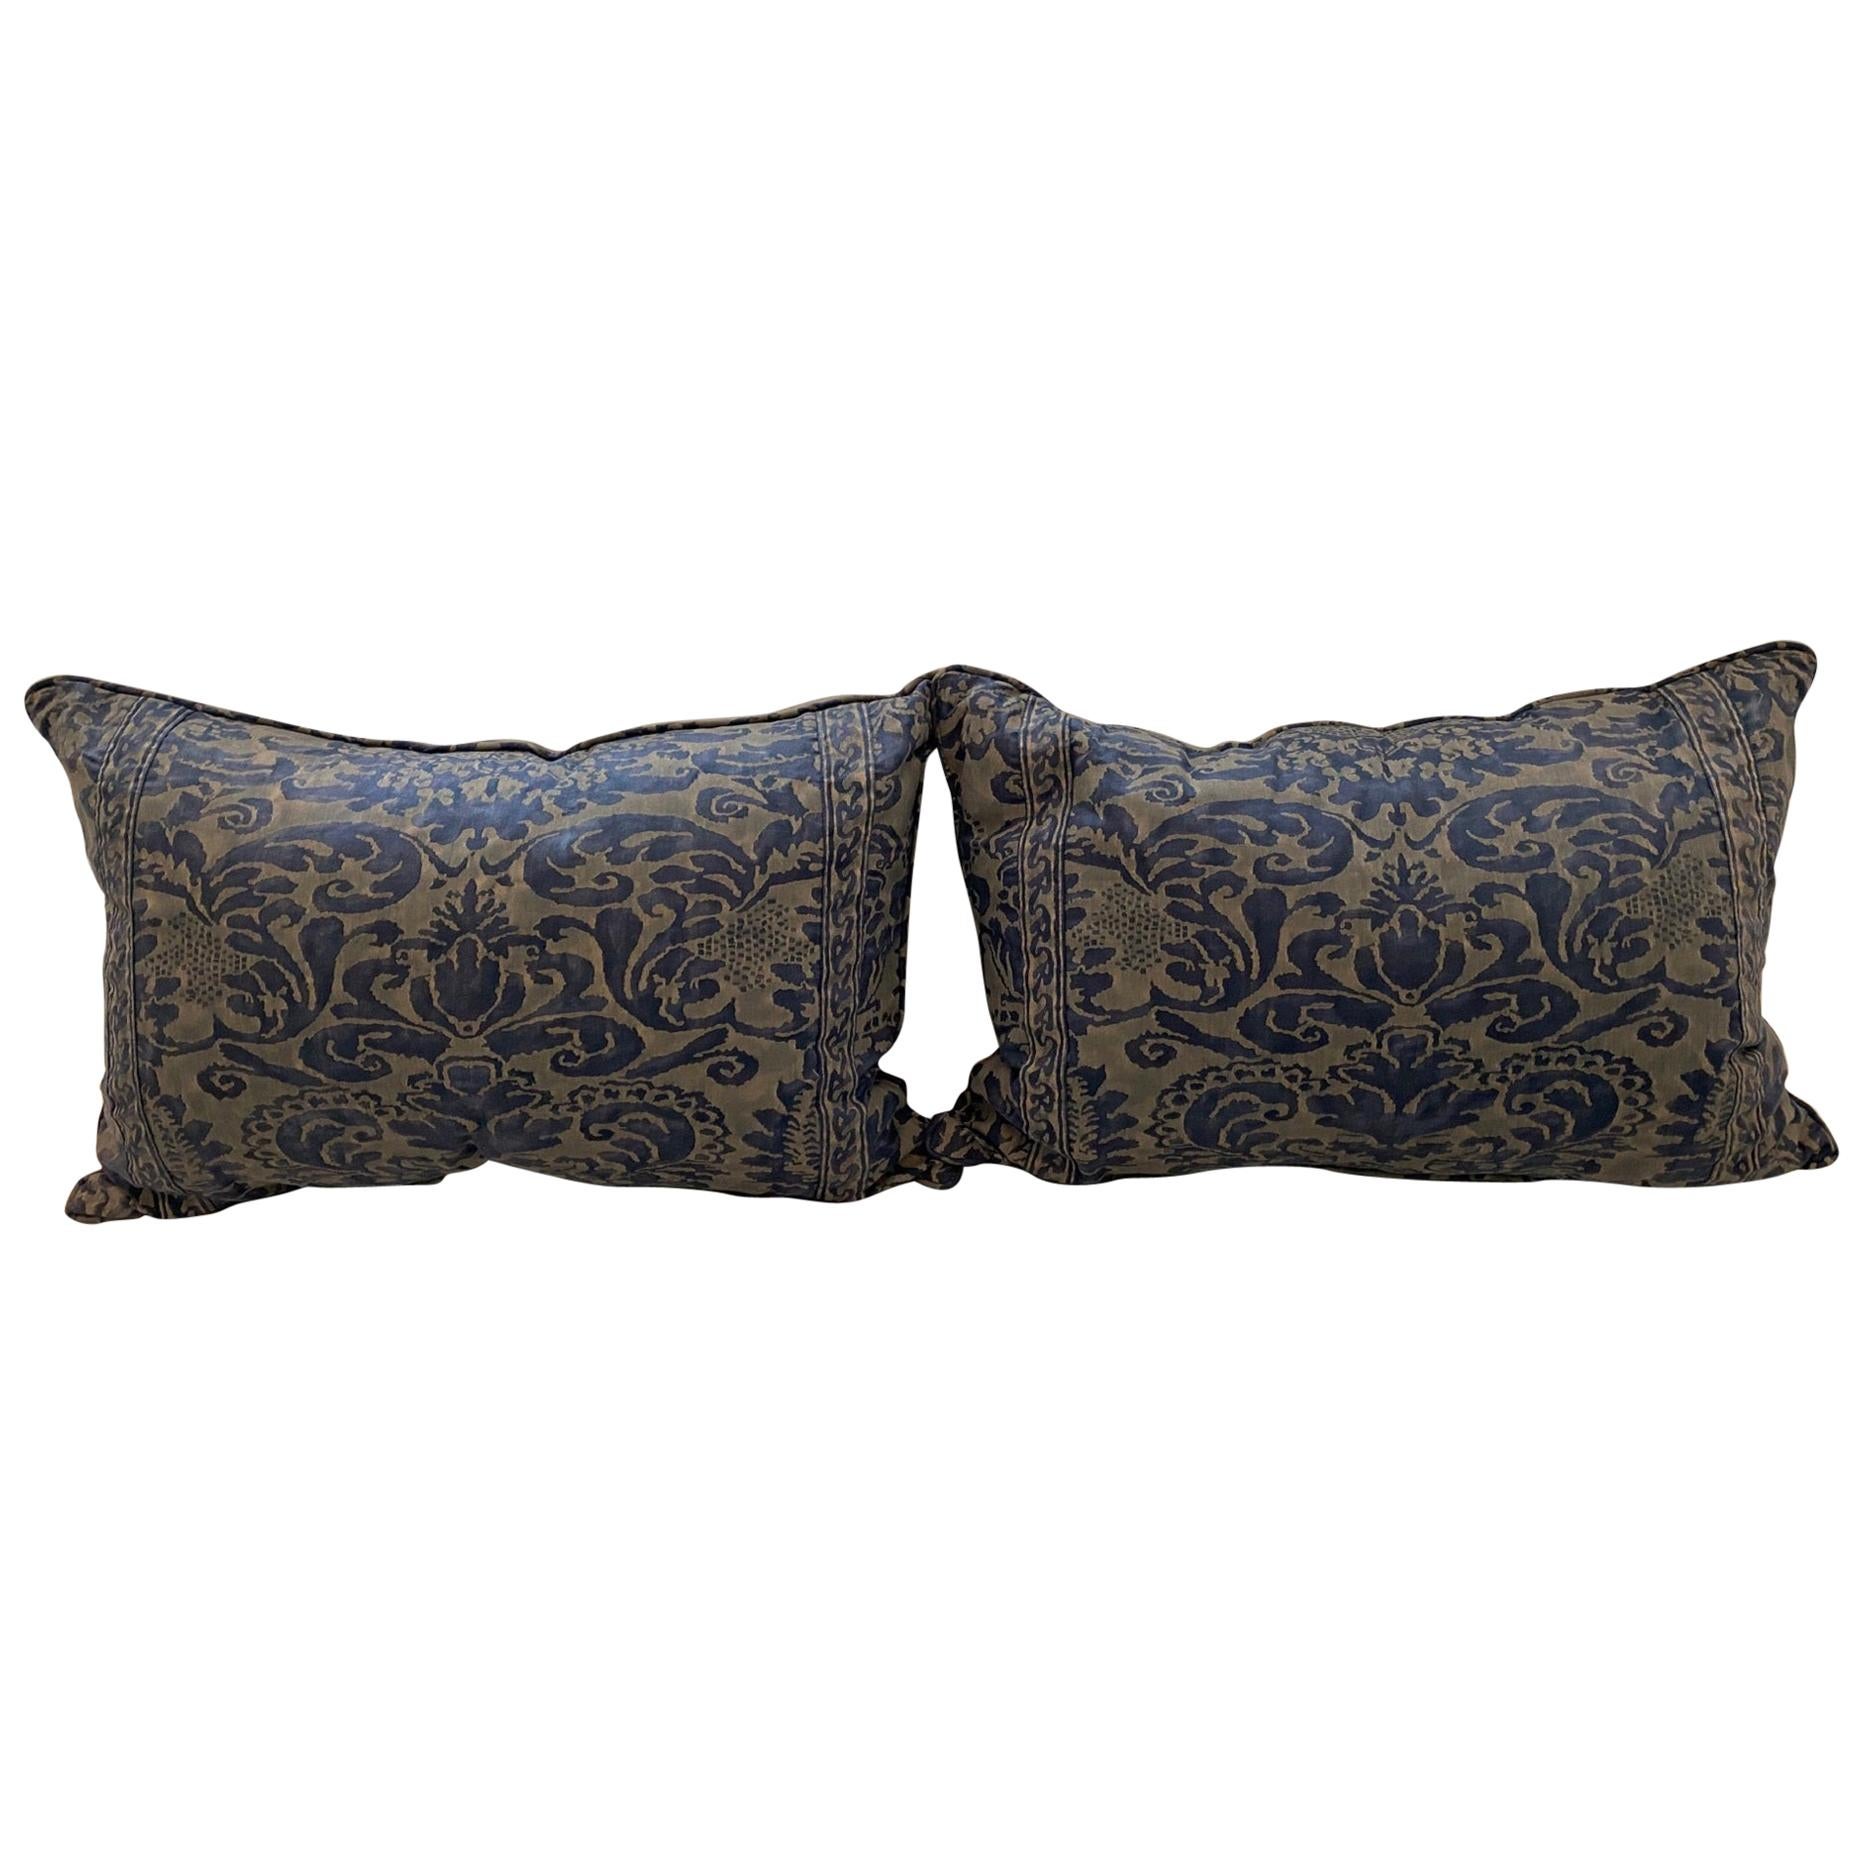 Pair of Fortuny Rectangular Cushions in the "CORONE" Pattern